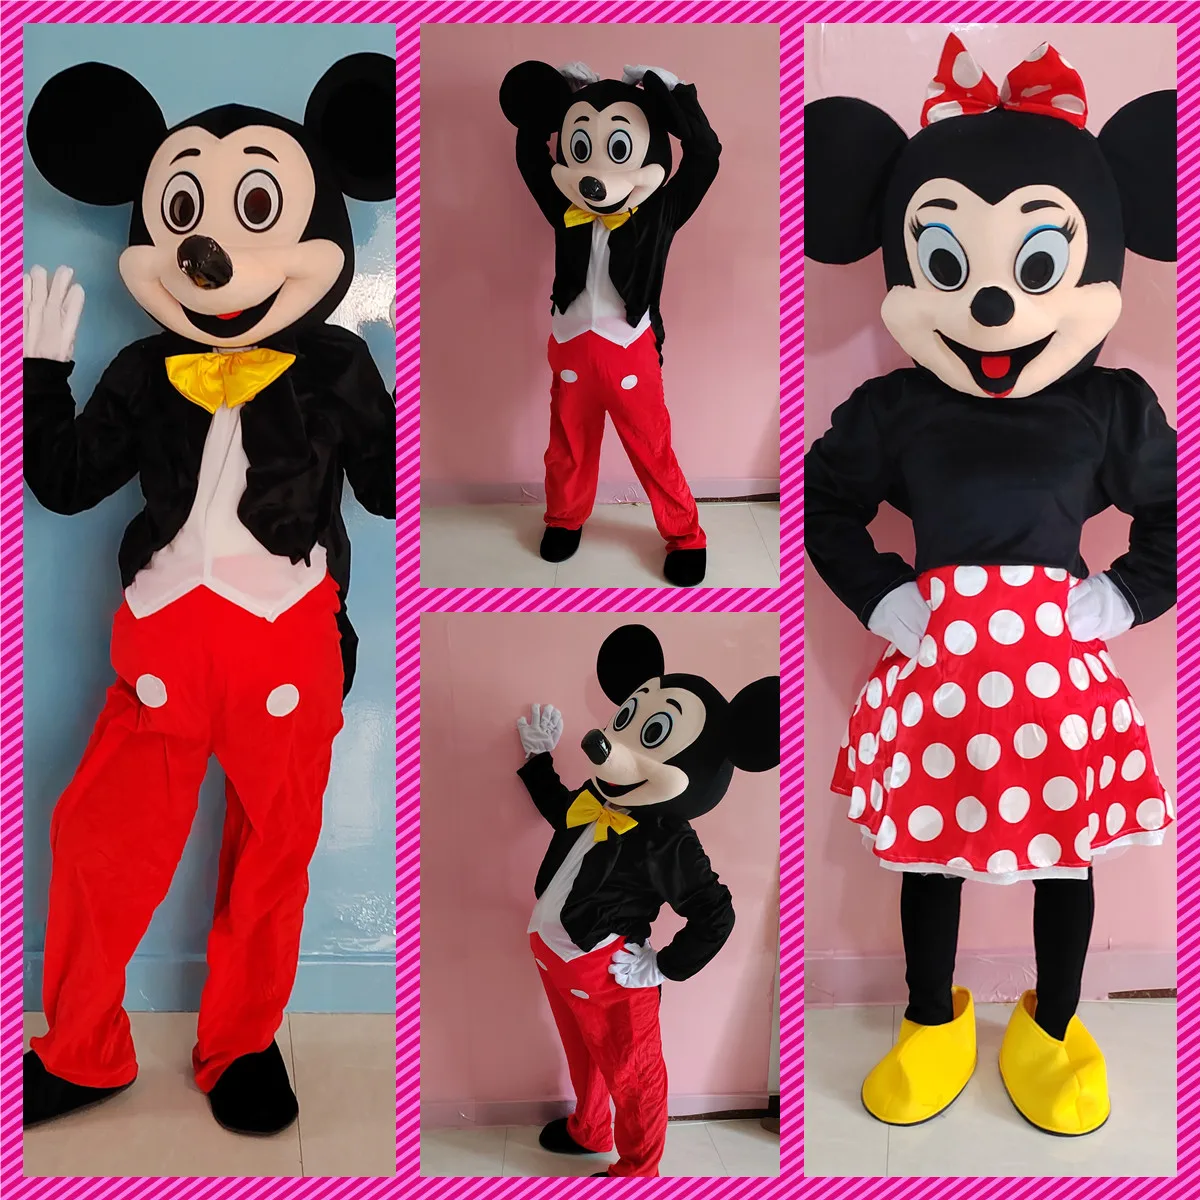 

Disney Large Mickey Mouse Costume Adult EVA Head Short Plush Mascot Set Animal Character Doll Costume Event Party Cosplay Costum